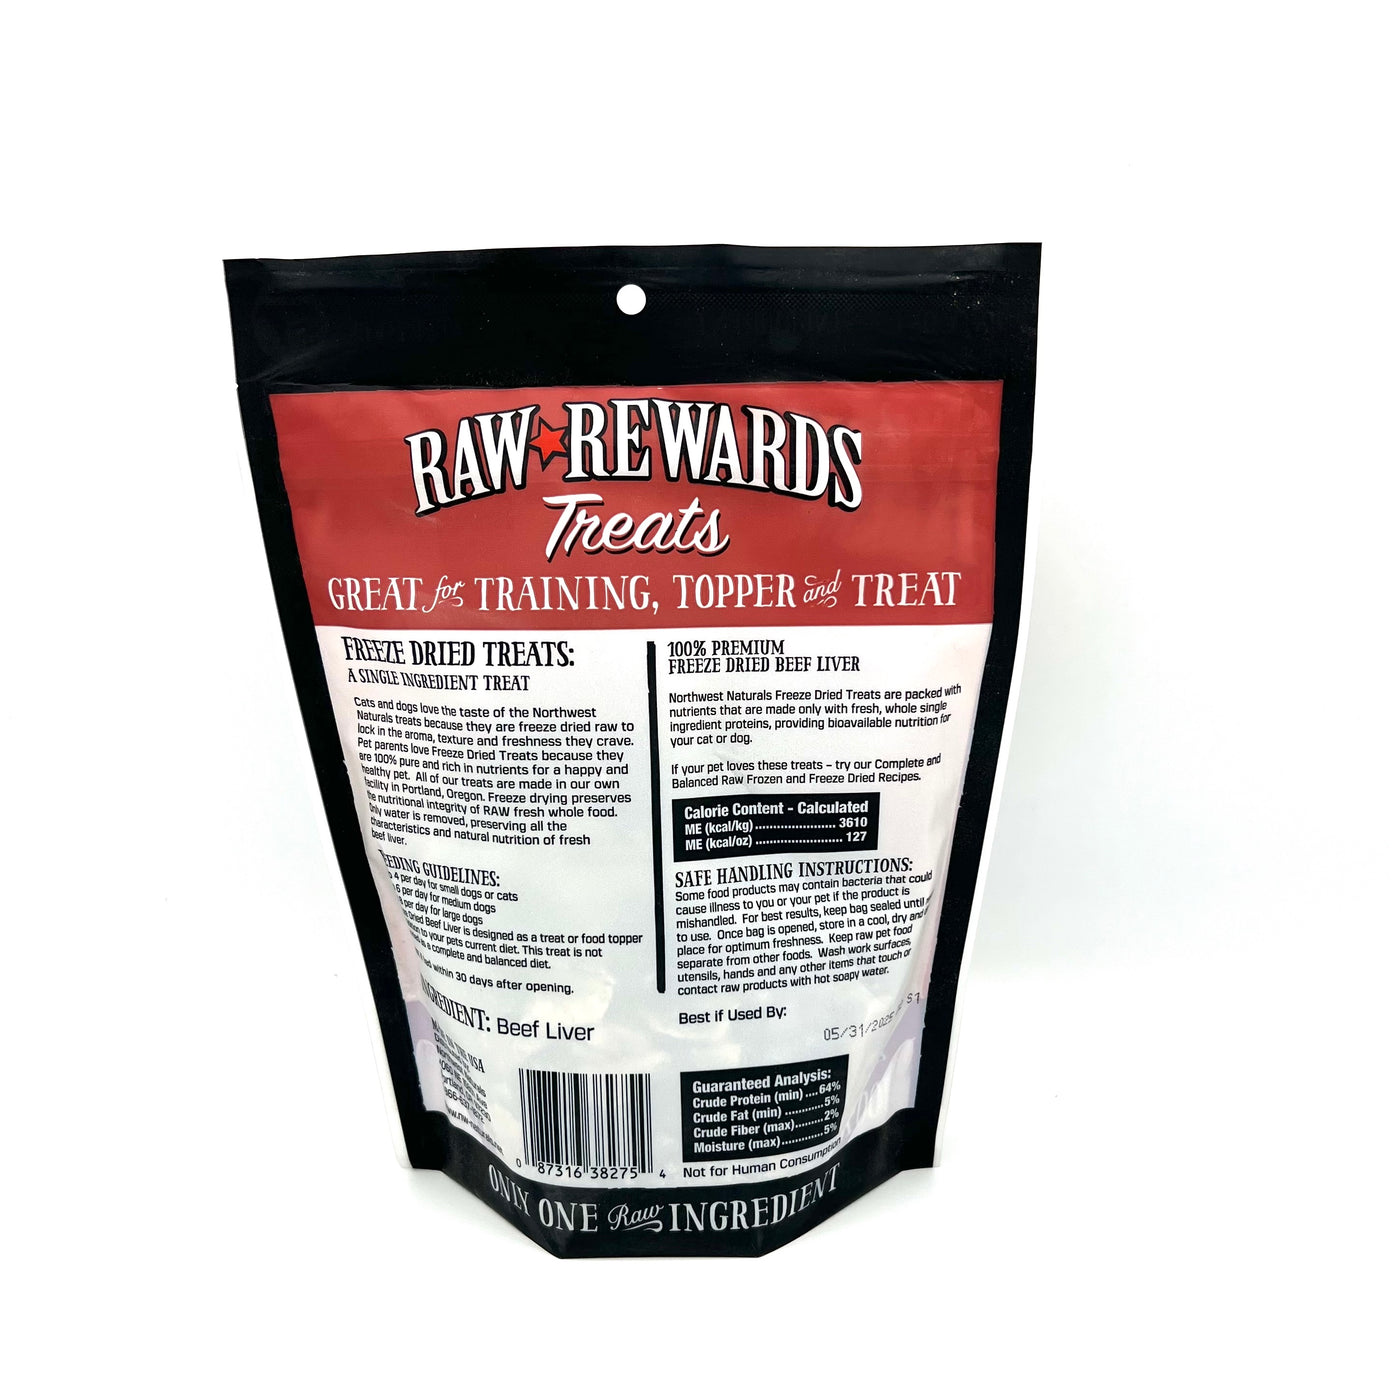 Raw Rewards beef liver package back